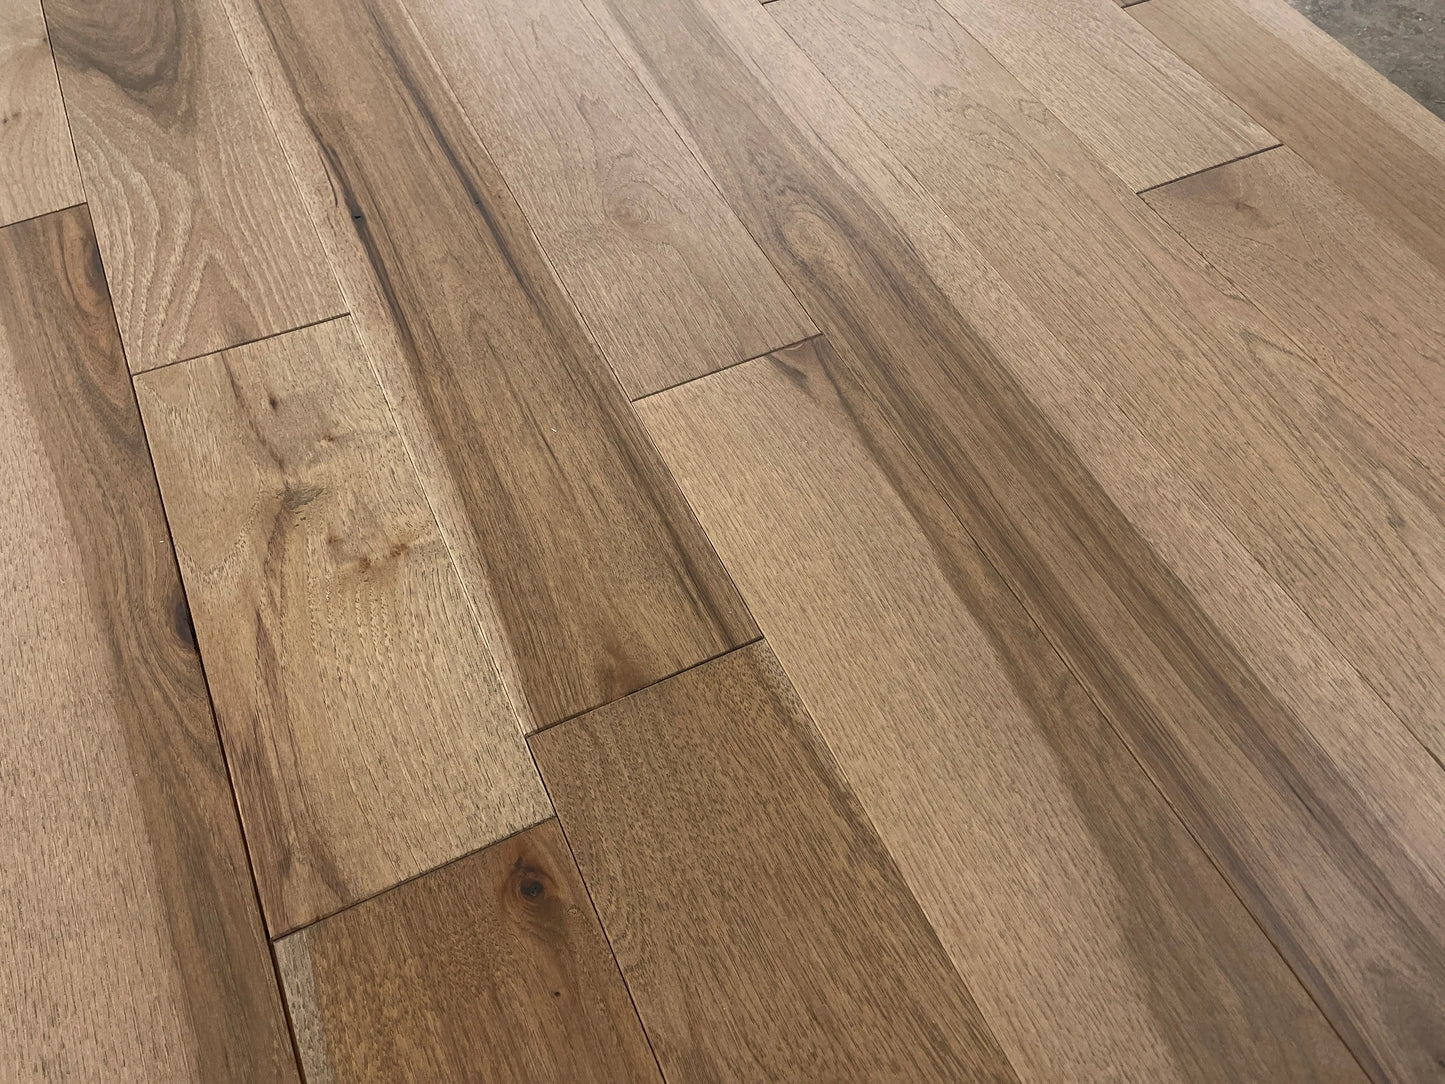 AT014 Hickory Wheat Solid or Engineered Hardwood Flooring- Call 844-356-6711 for BEST price! AT BEAS